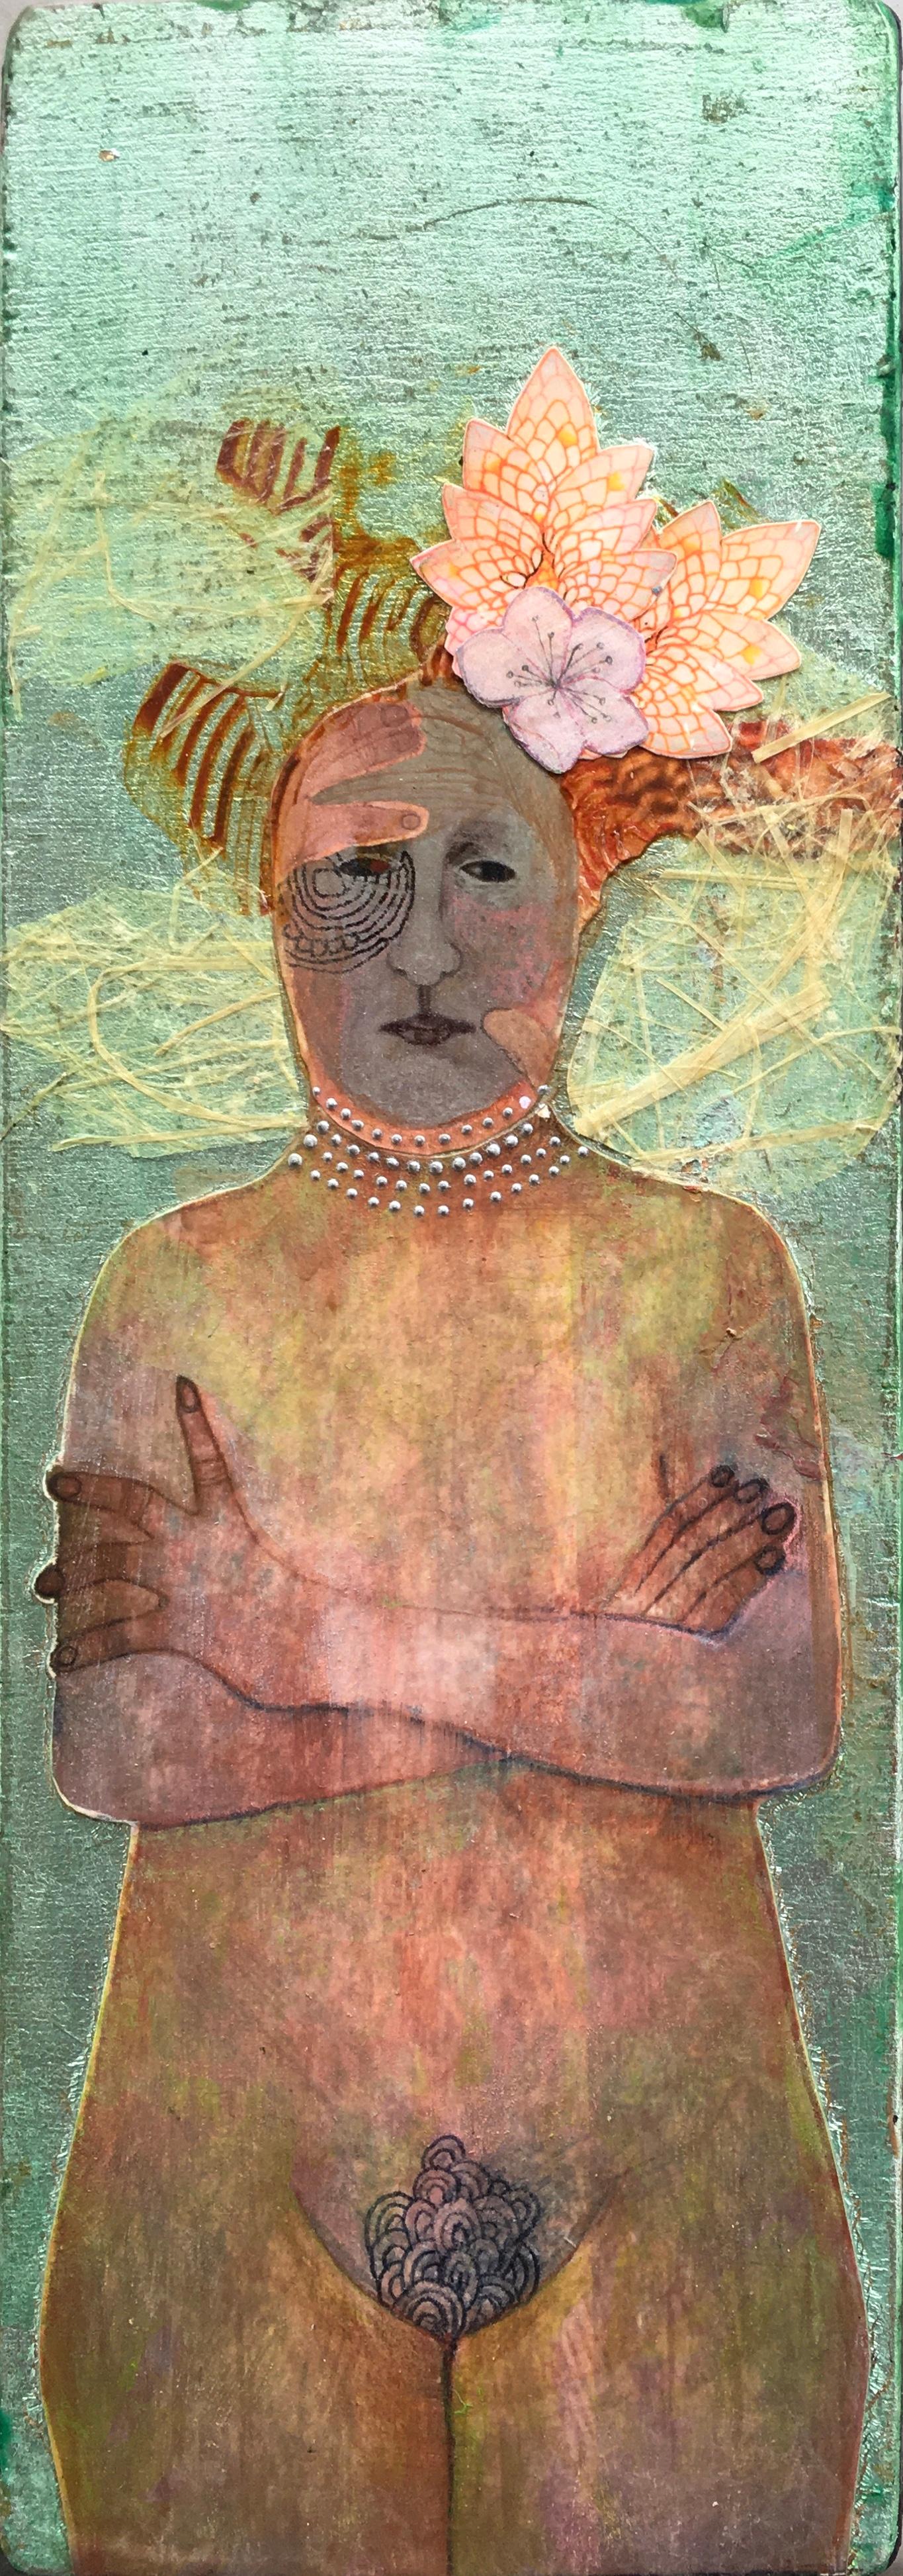 Guard, nude portrait of woman with floral headpiece, green, mixed media on panel